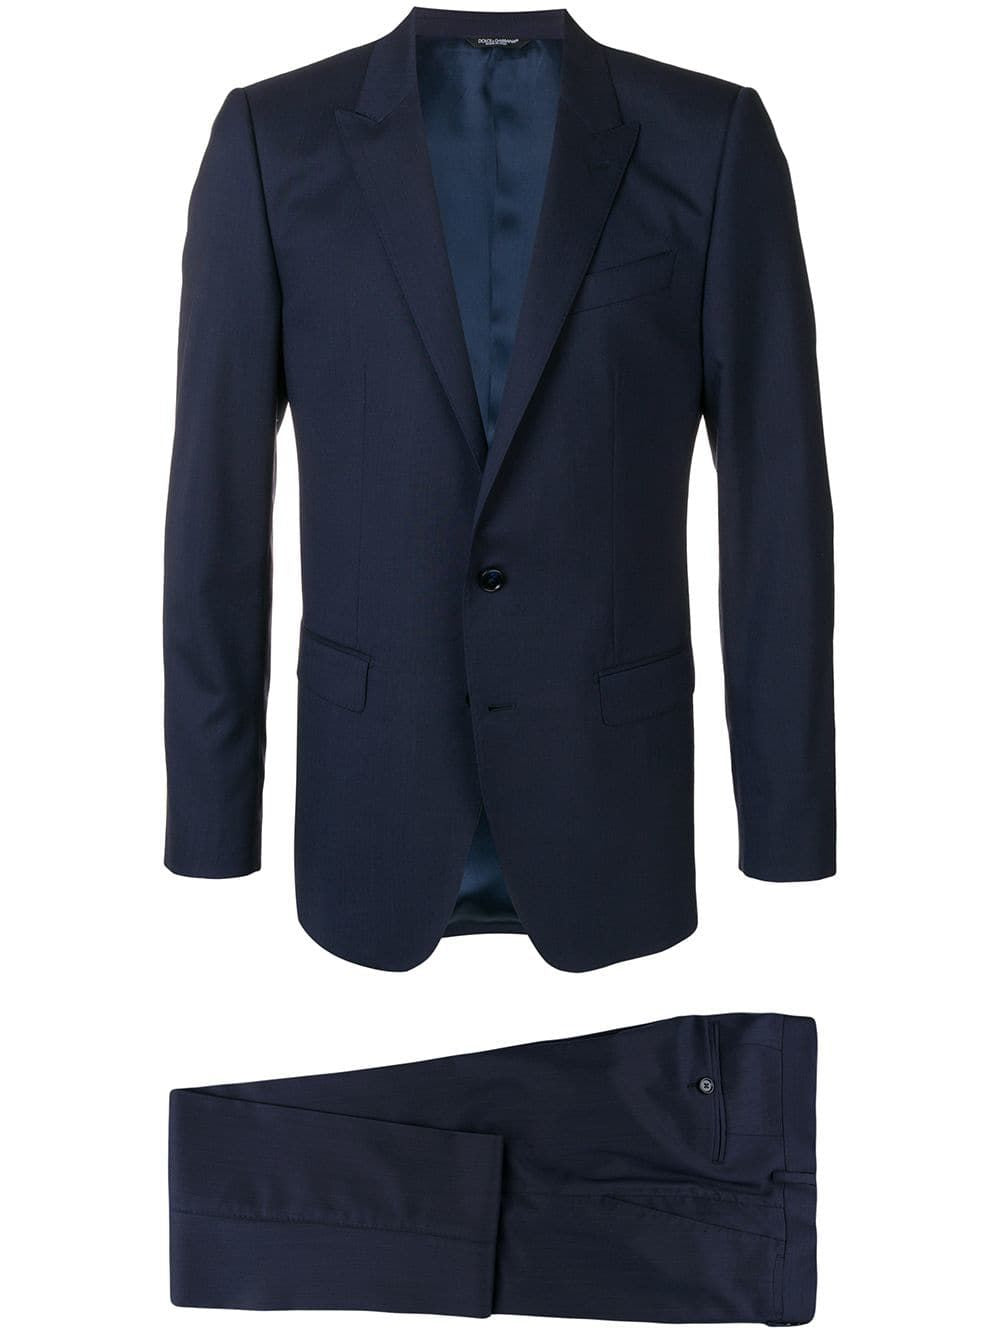 DOLCE & GABBANA Classic Single Breasted Two Piece Suit for Men - SS19